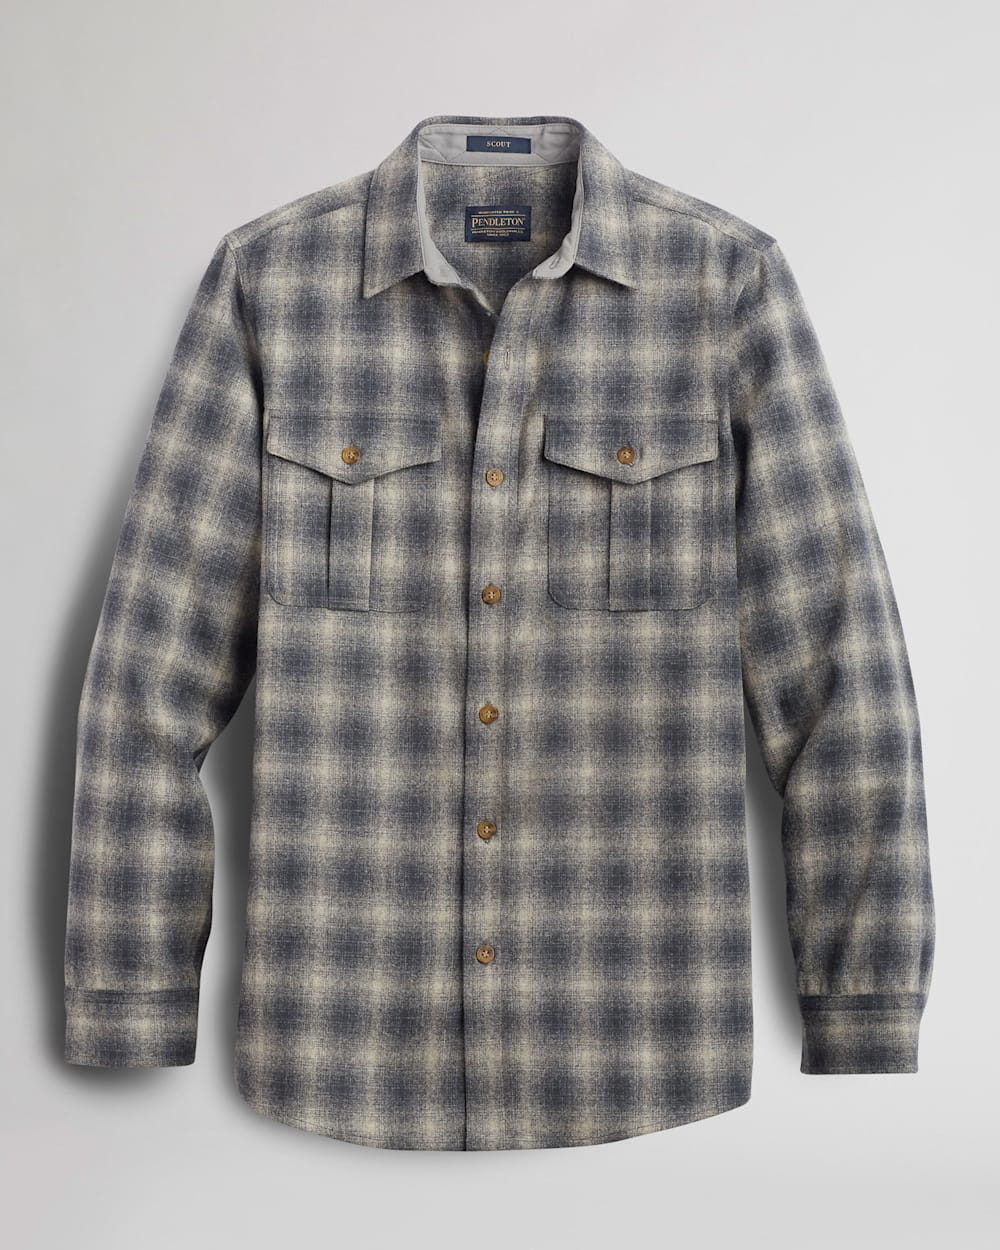 MEN'S PLAID SCOUT SHIRT IN TAN/GREY OMBRE PLAID image number 1